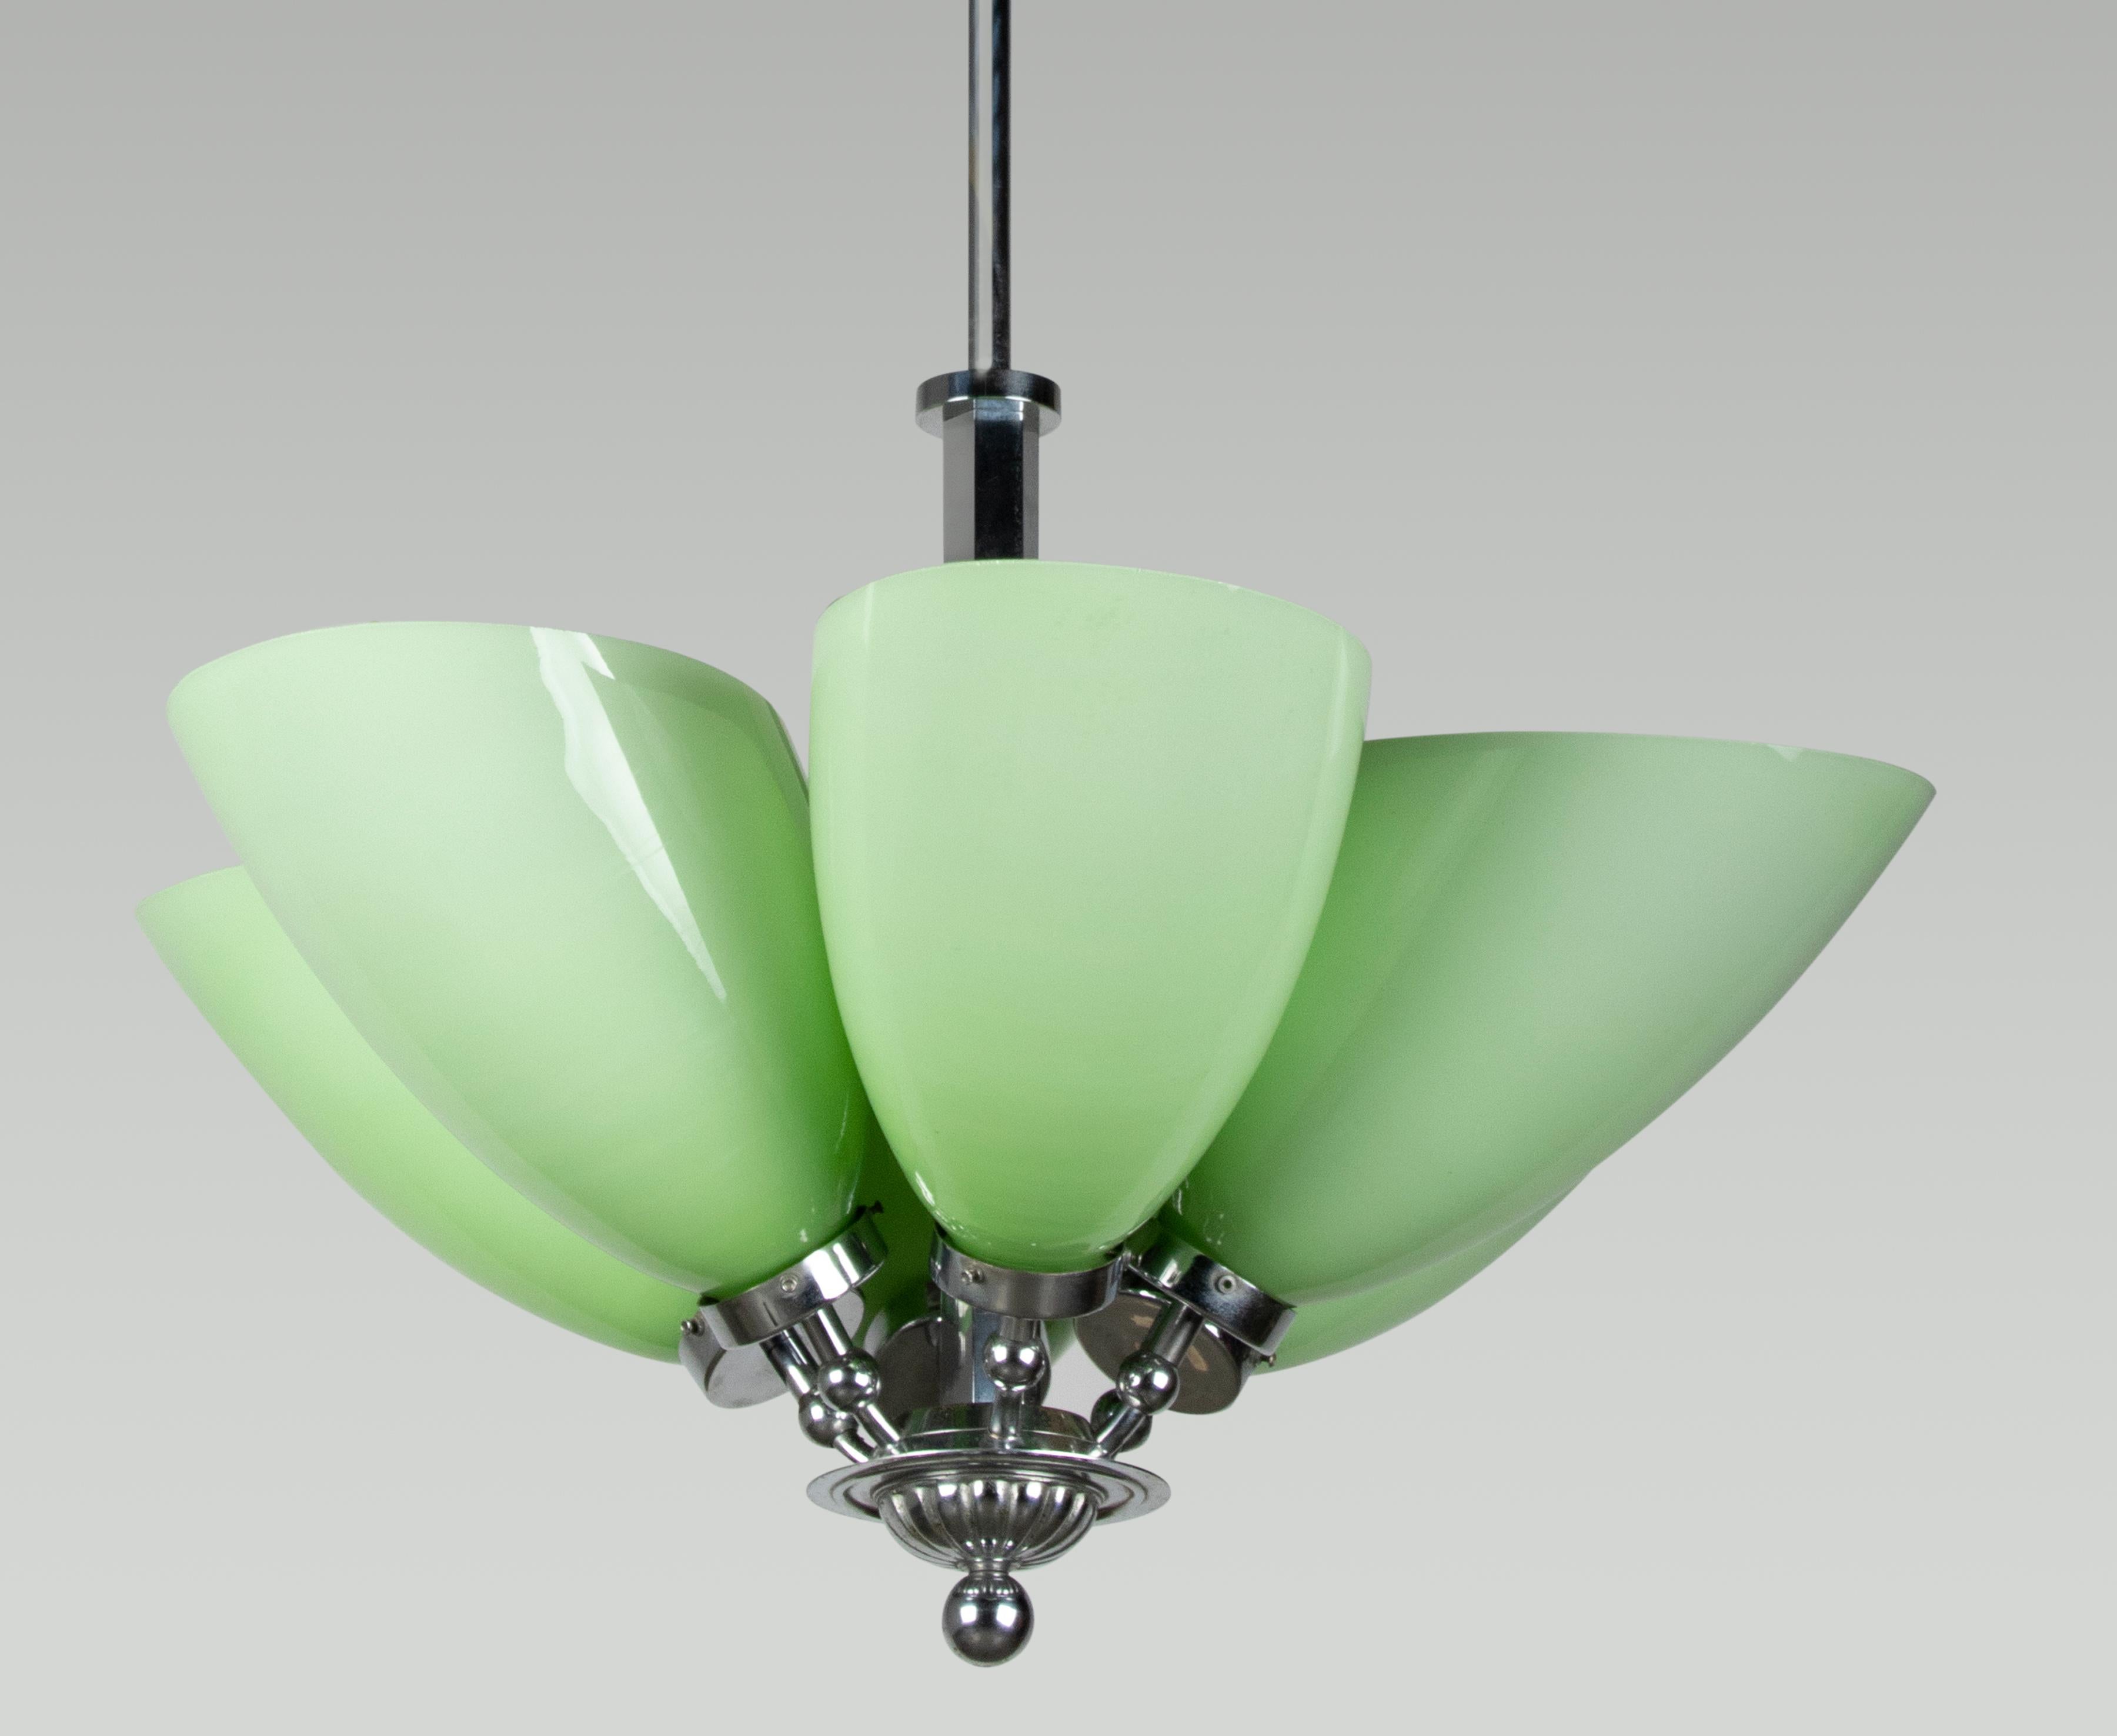 Beautiful Art Deco chandelier with large green glass shades. The lamp is made of chromed metal. The glass shades are made of opaline glass, there is a subtile color gradient in the glass from light to darker green. The lamp gives a nice soft light